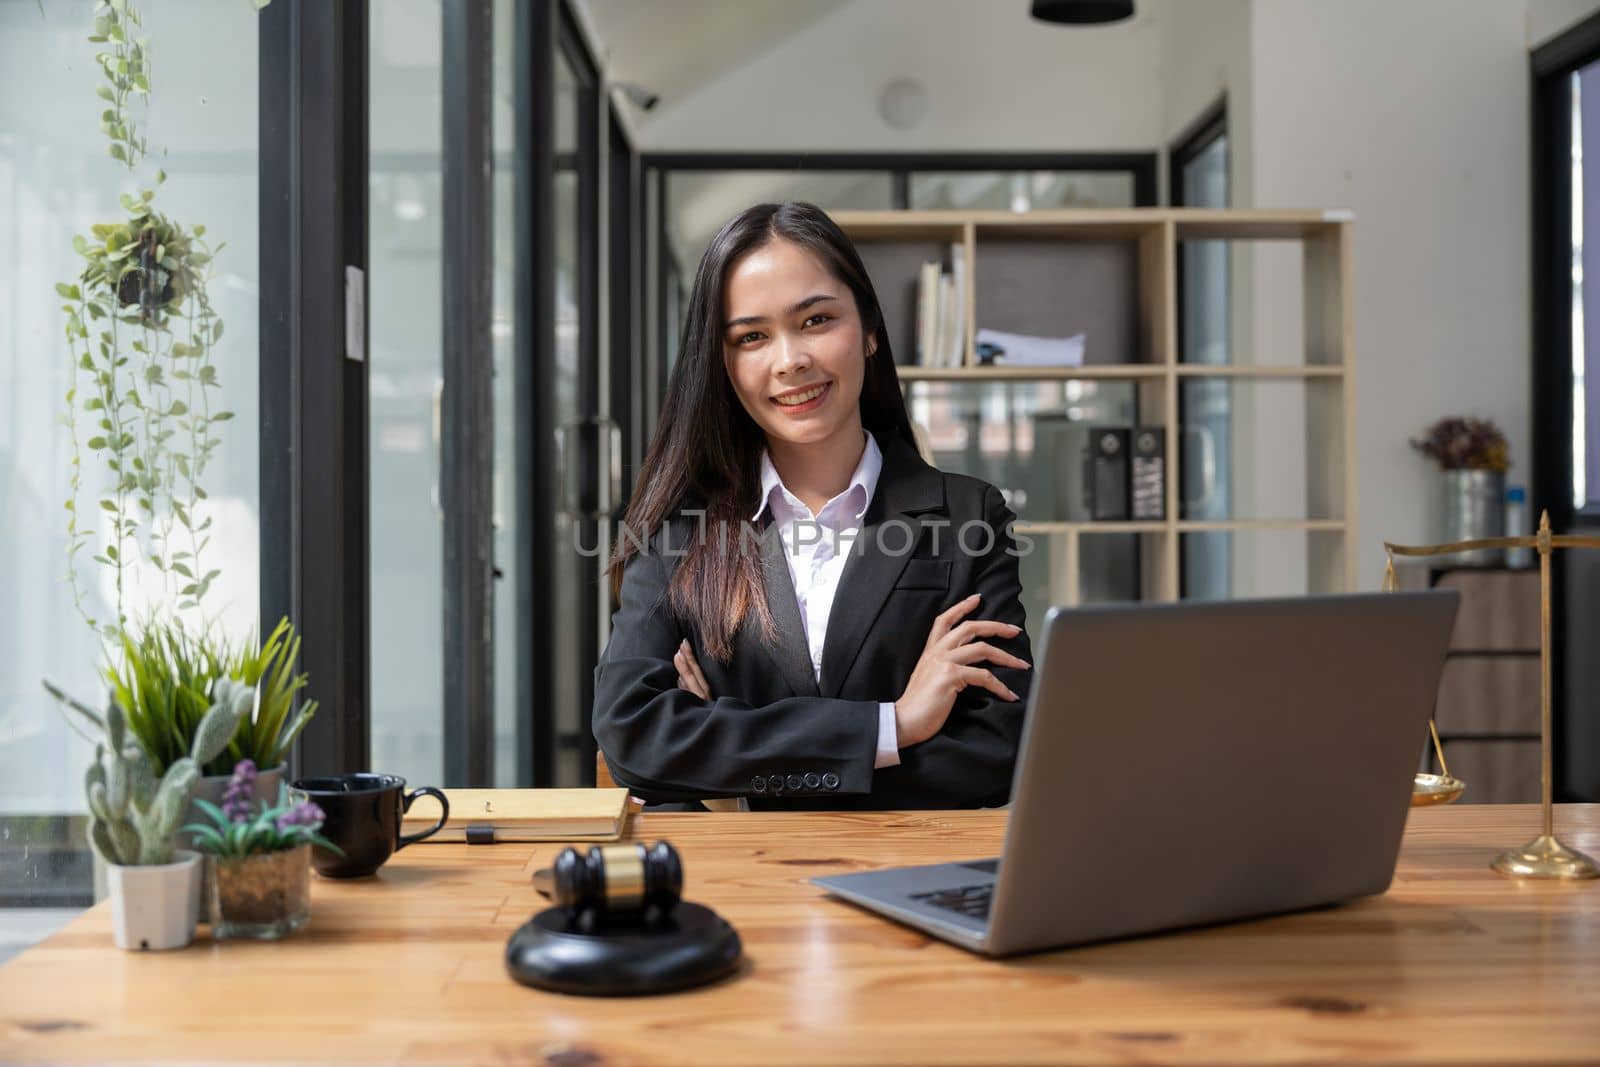 Asian business lawyer woman smiling at camera at workplace in an office.